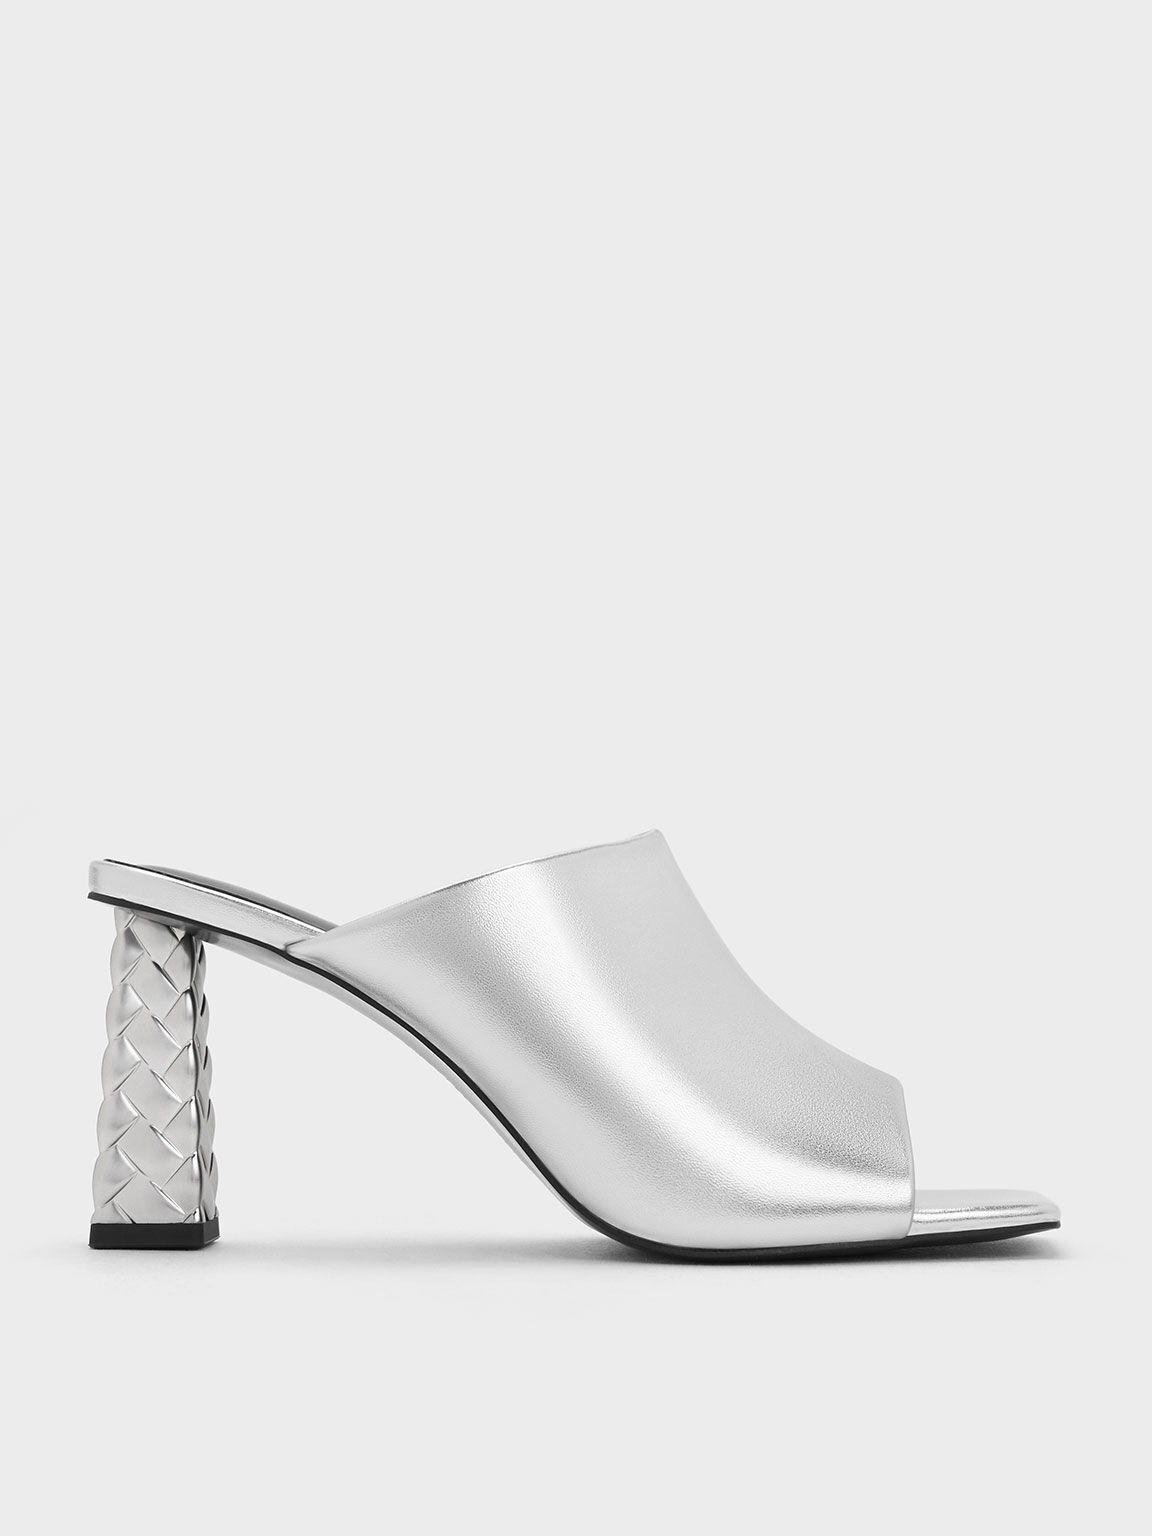 Silver Open Toe Quilted Heel Mules - CHARLES & KEITH LK